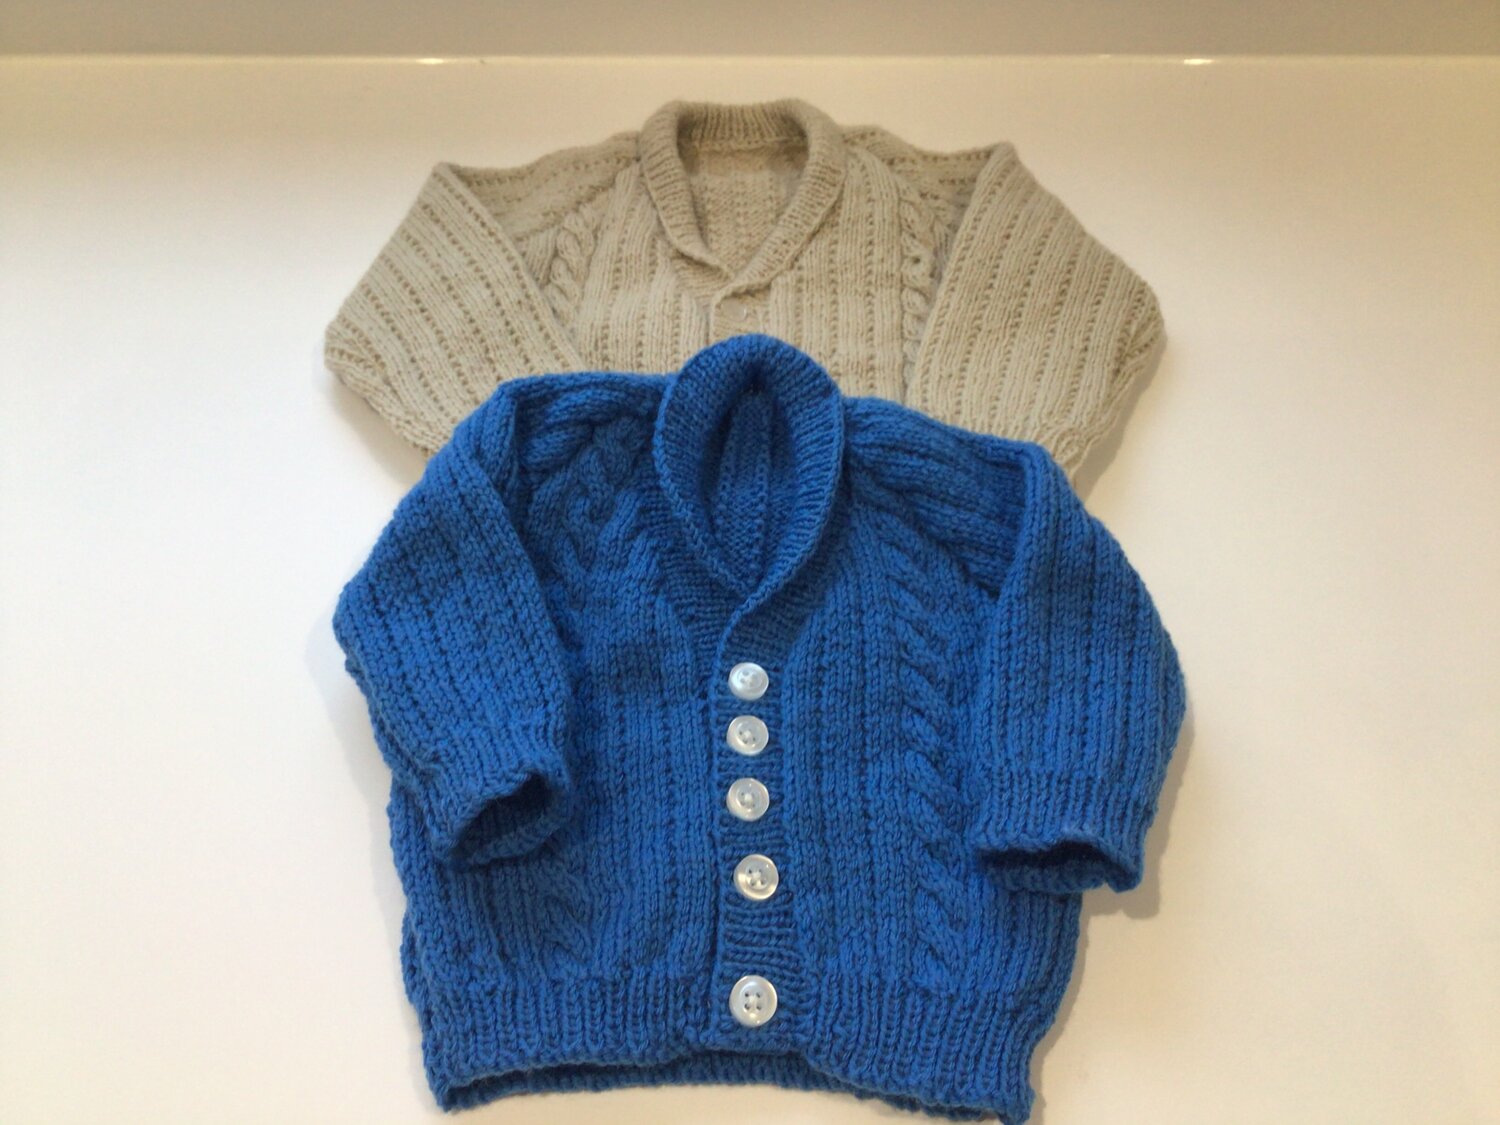 3-6 Months Baby Hand Knitted Cardigan Long Sleeves Button Closure 100% Wool LillyBella & Co 